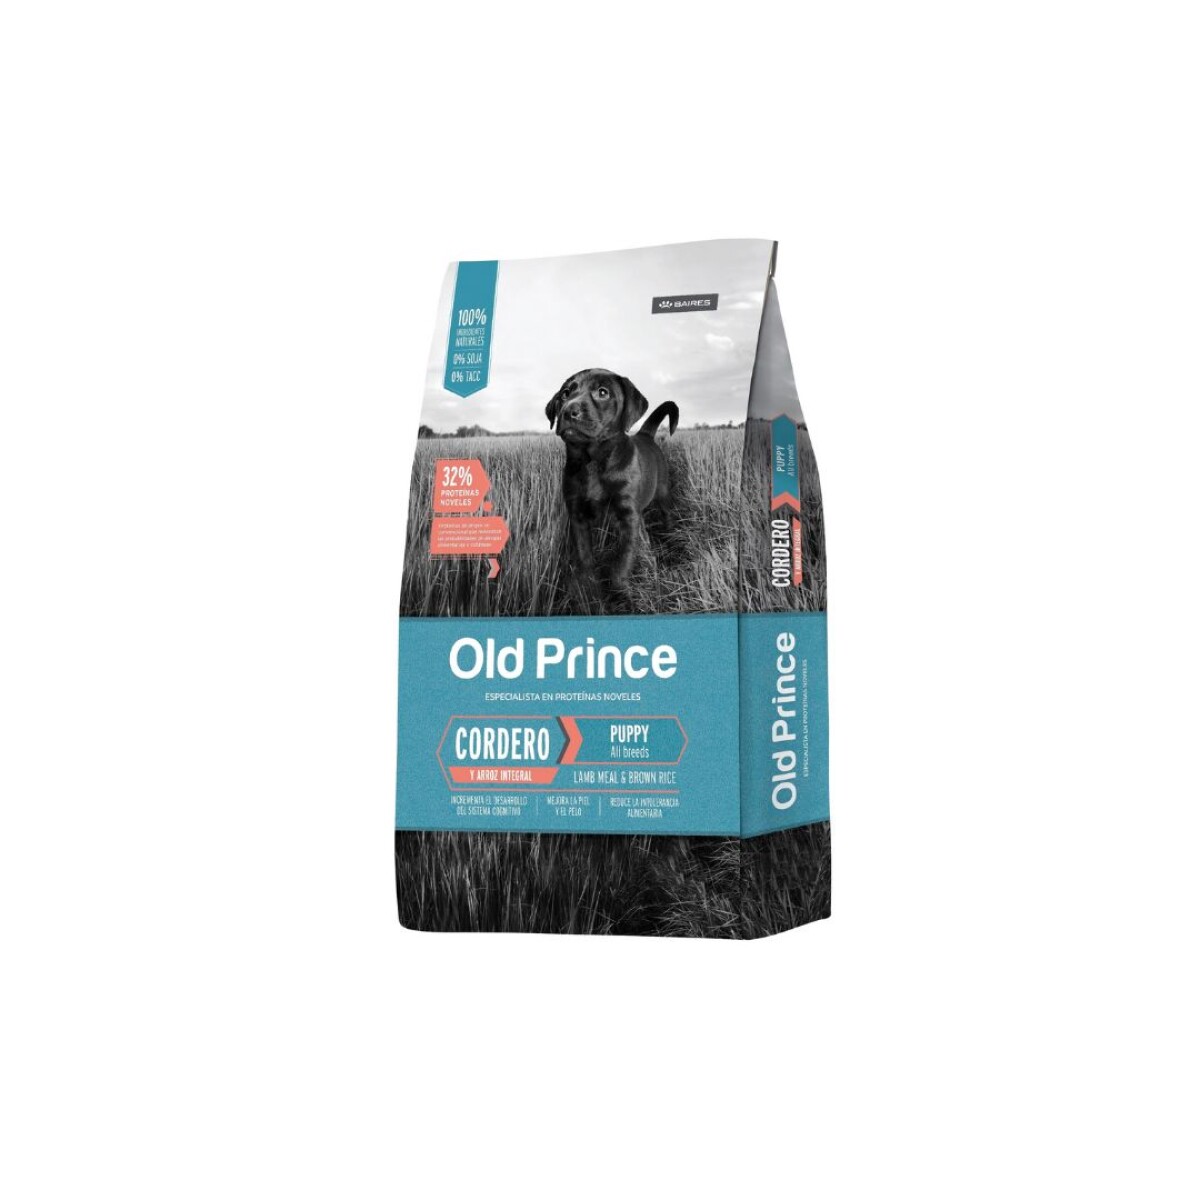 OLD PRINCE NOVEL CACH CORD Y ARR INT 3KG - Unica 